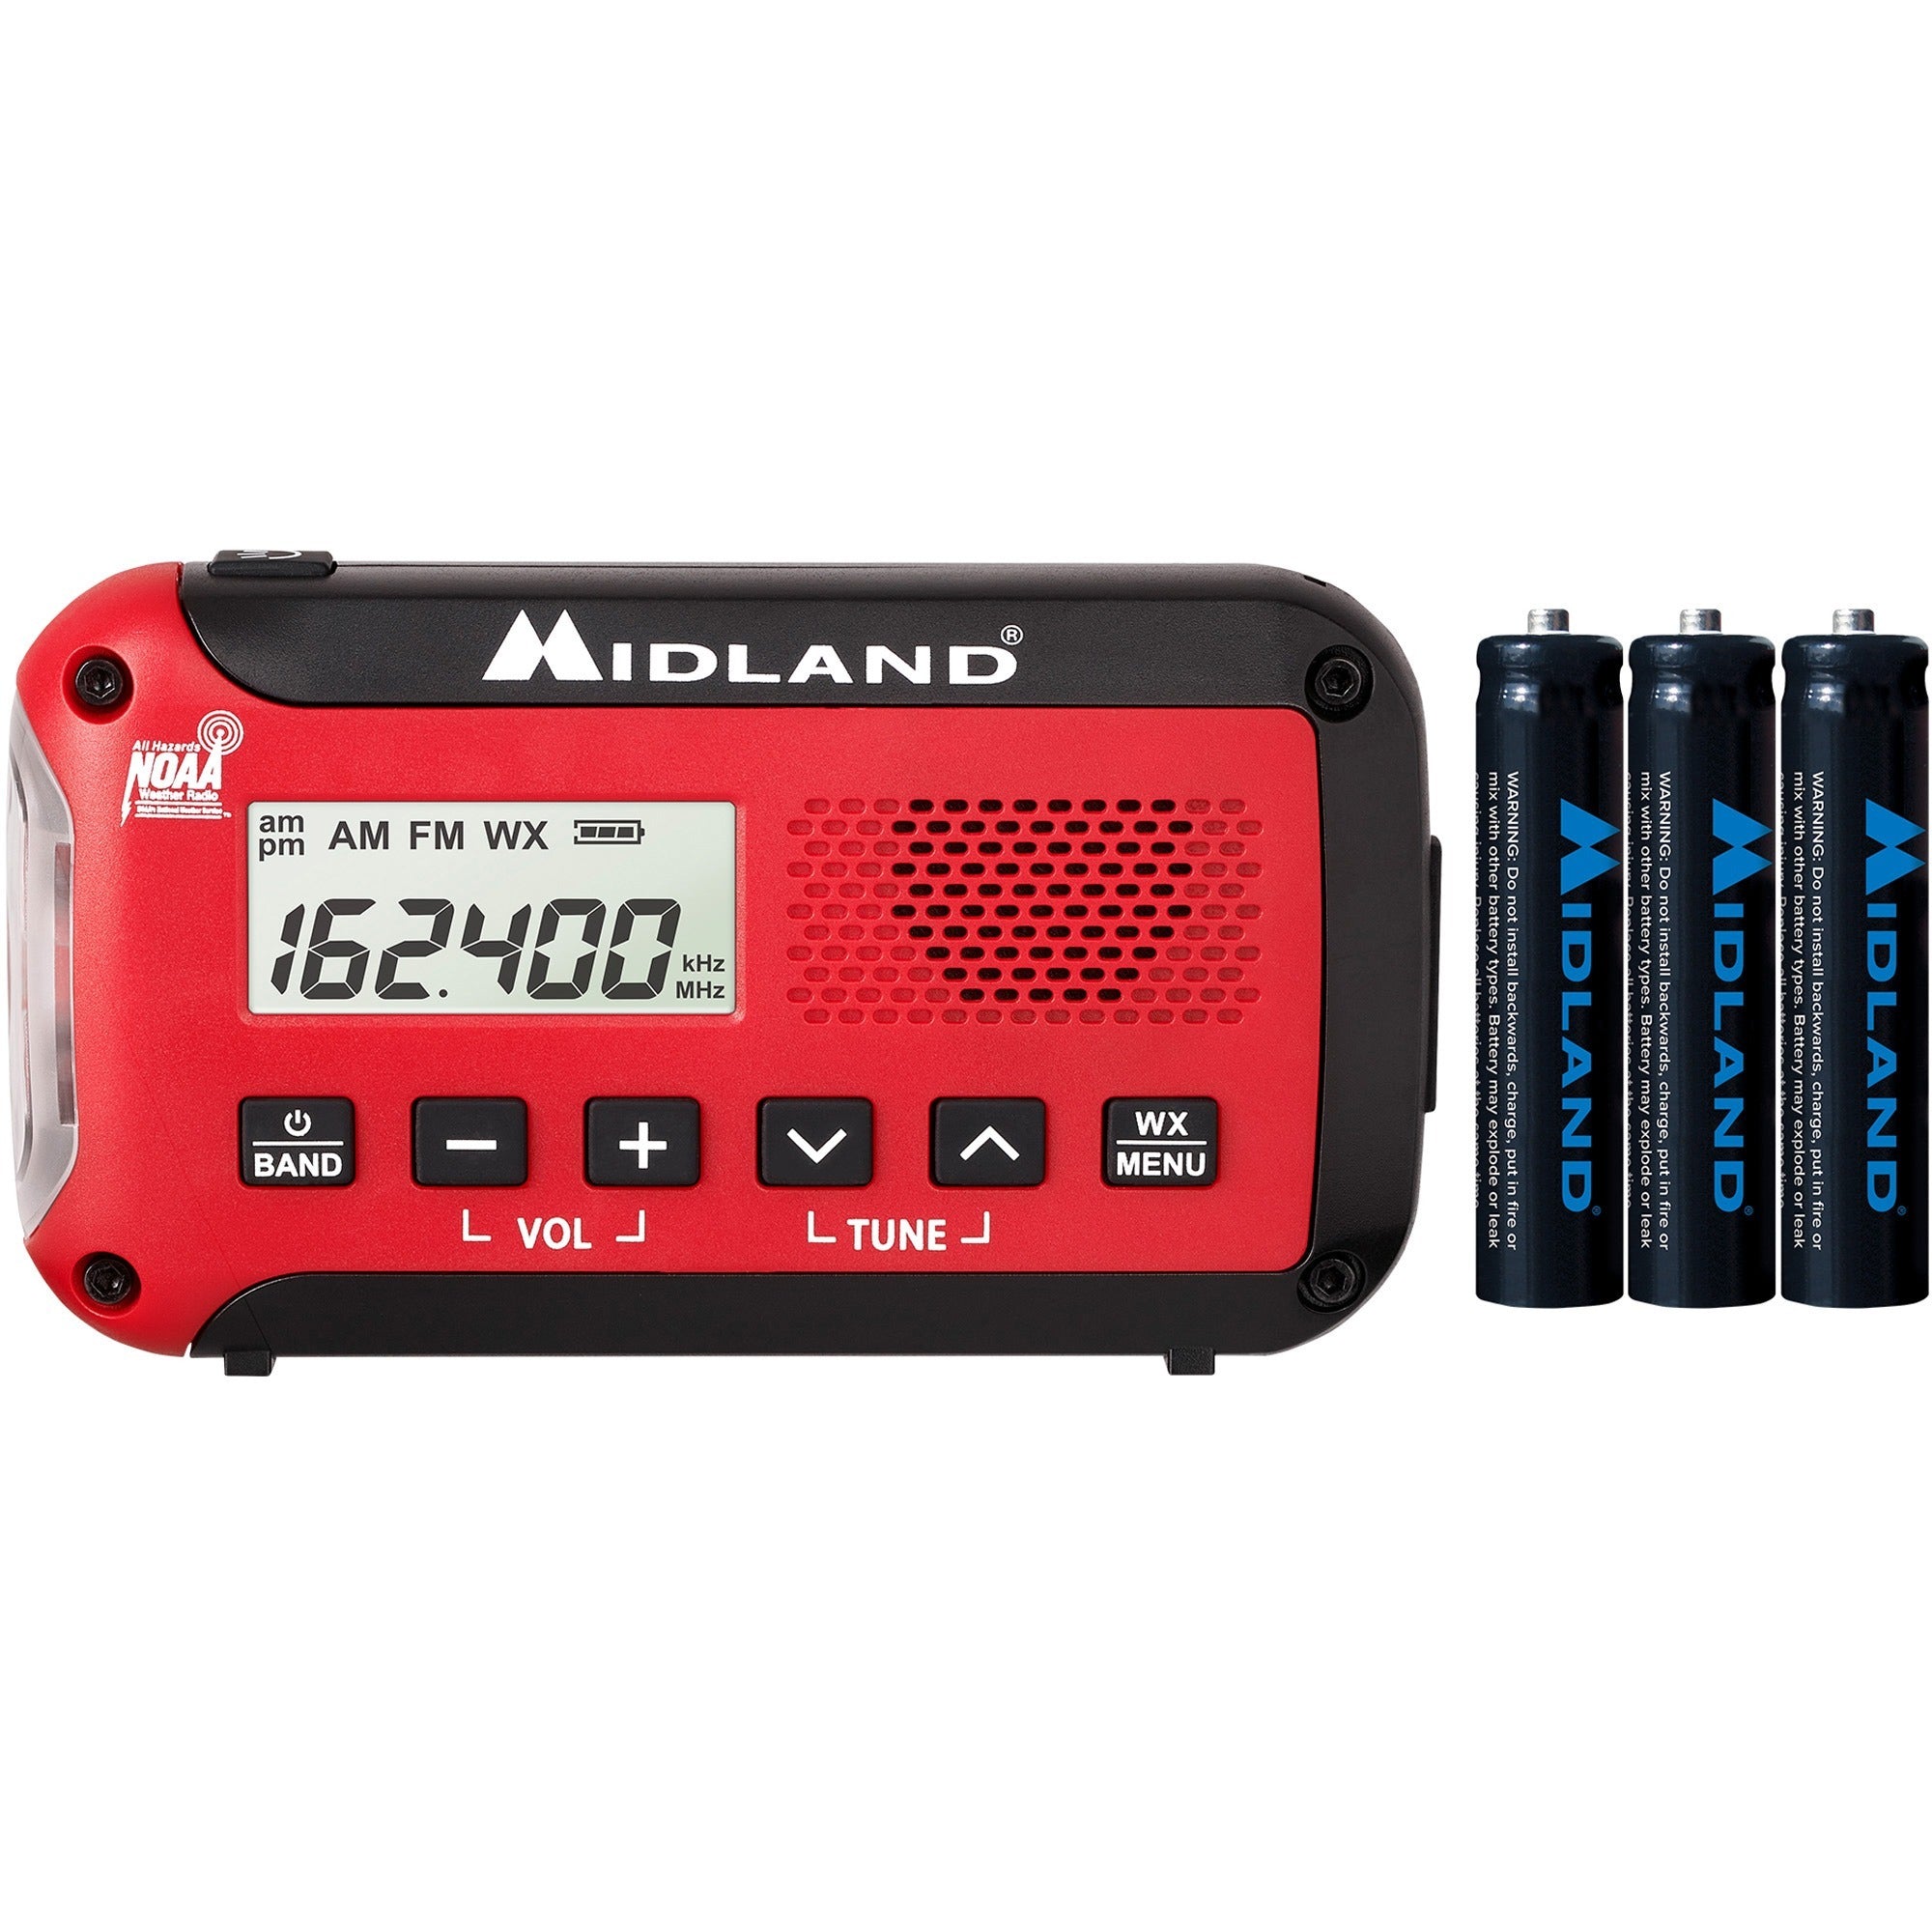 midland-e+ready-compact-emergency-alert-am-fm-weather-radio-for-hiking-weather-fishing-hunting-camping-overlanding-with-noaa-all-hazard-am-fm-portable_mroer10vp - 1